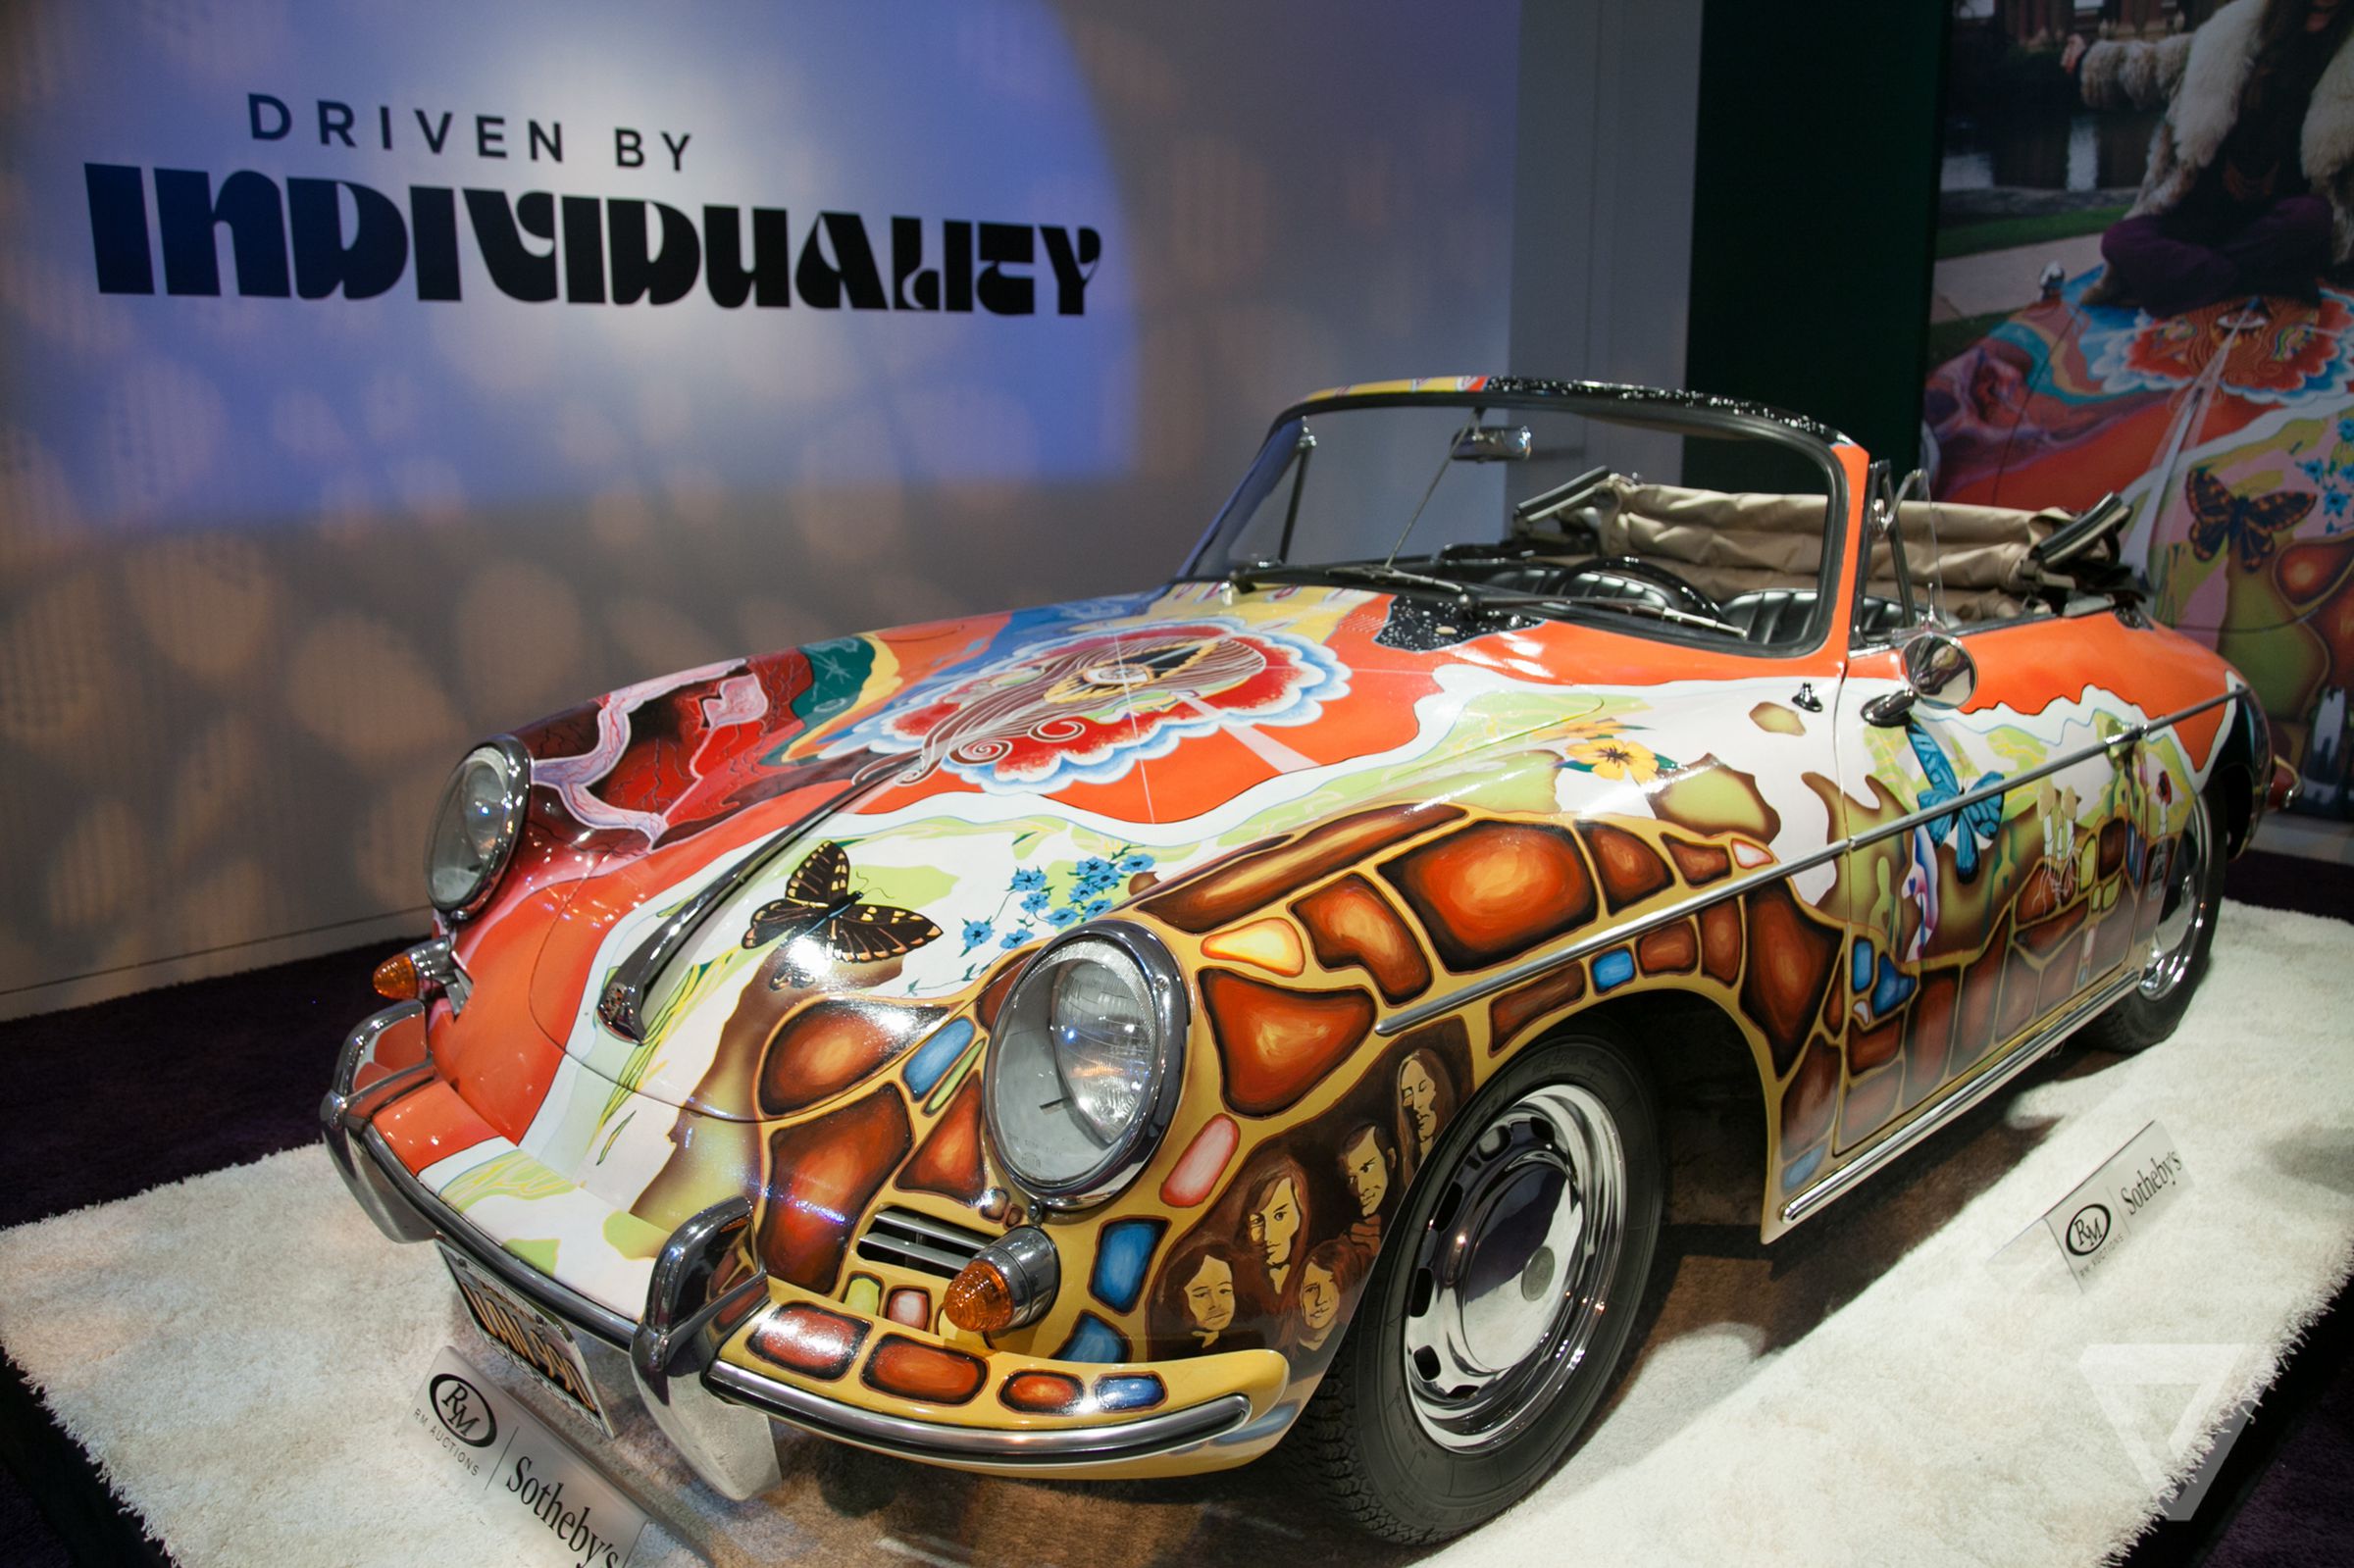 Rare automobile up for auction at Sotheby's